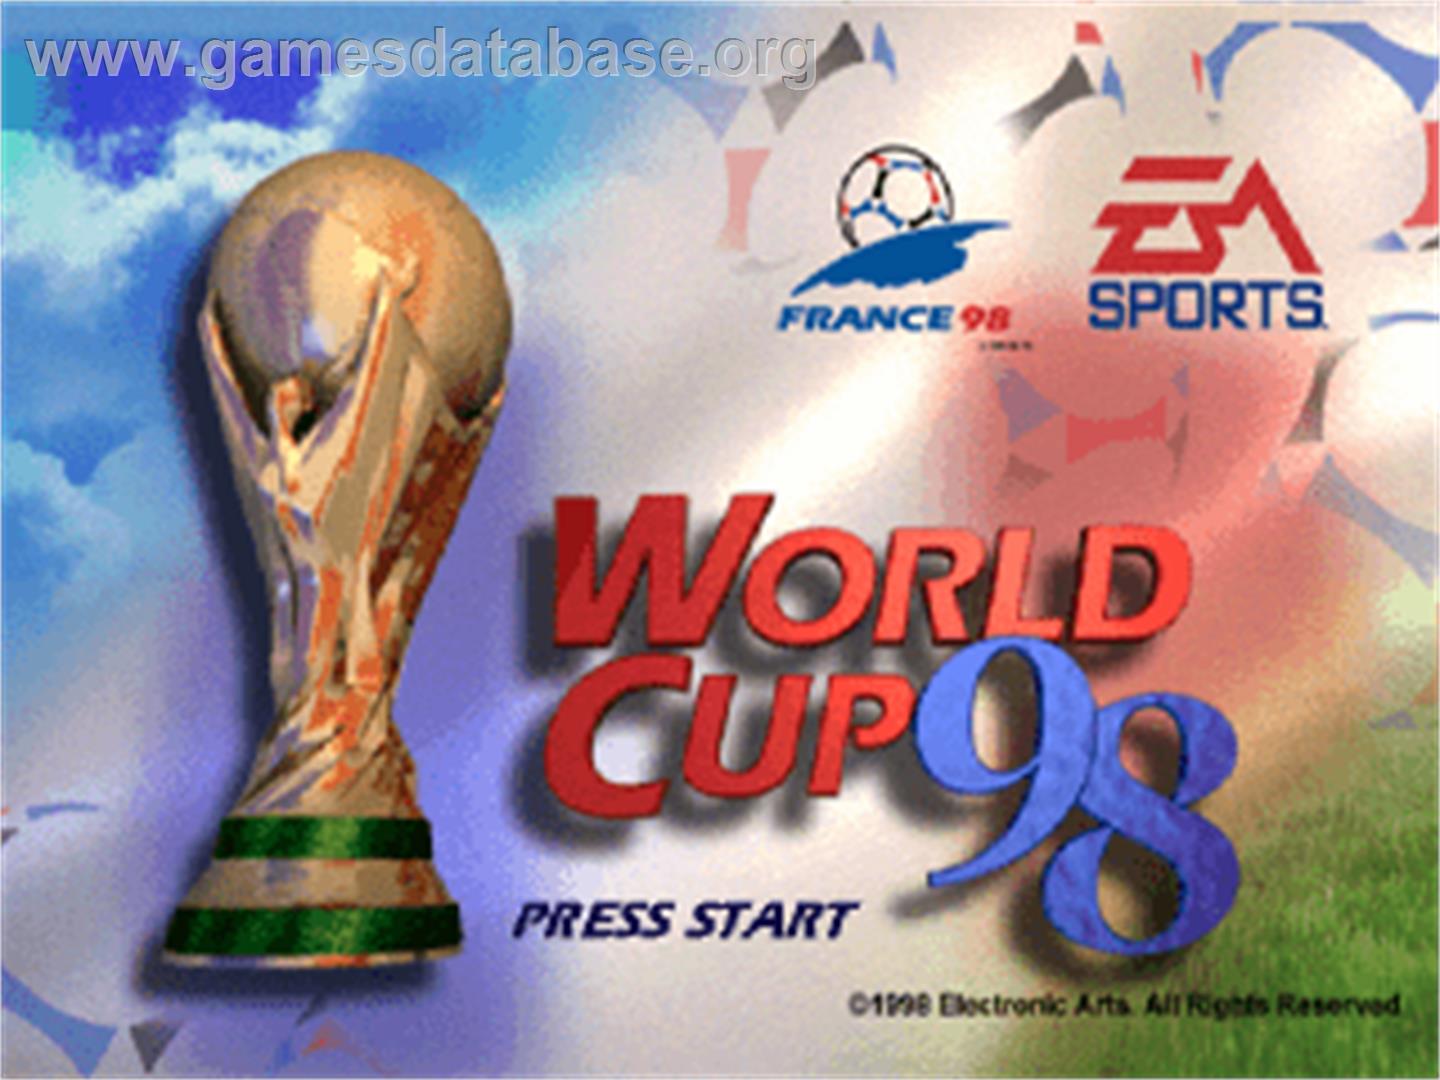 World Cup 98 - Sony Playstation - Artwork - Title Screen